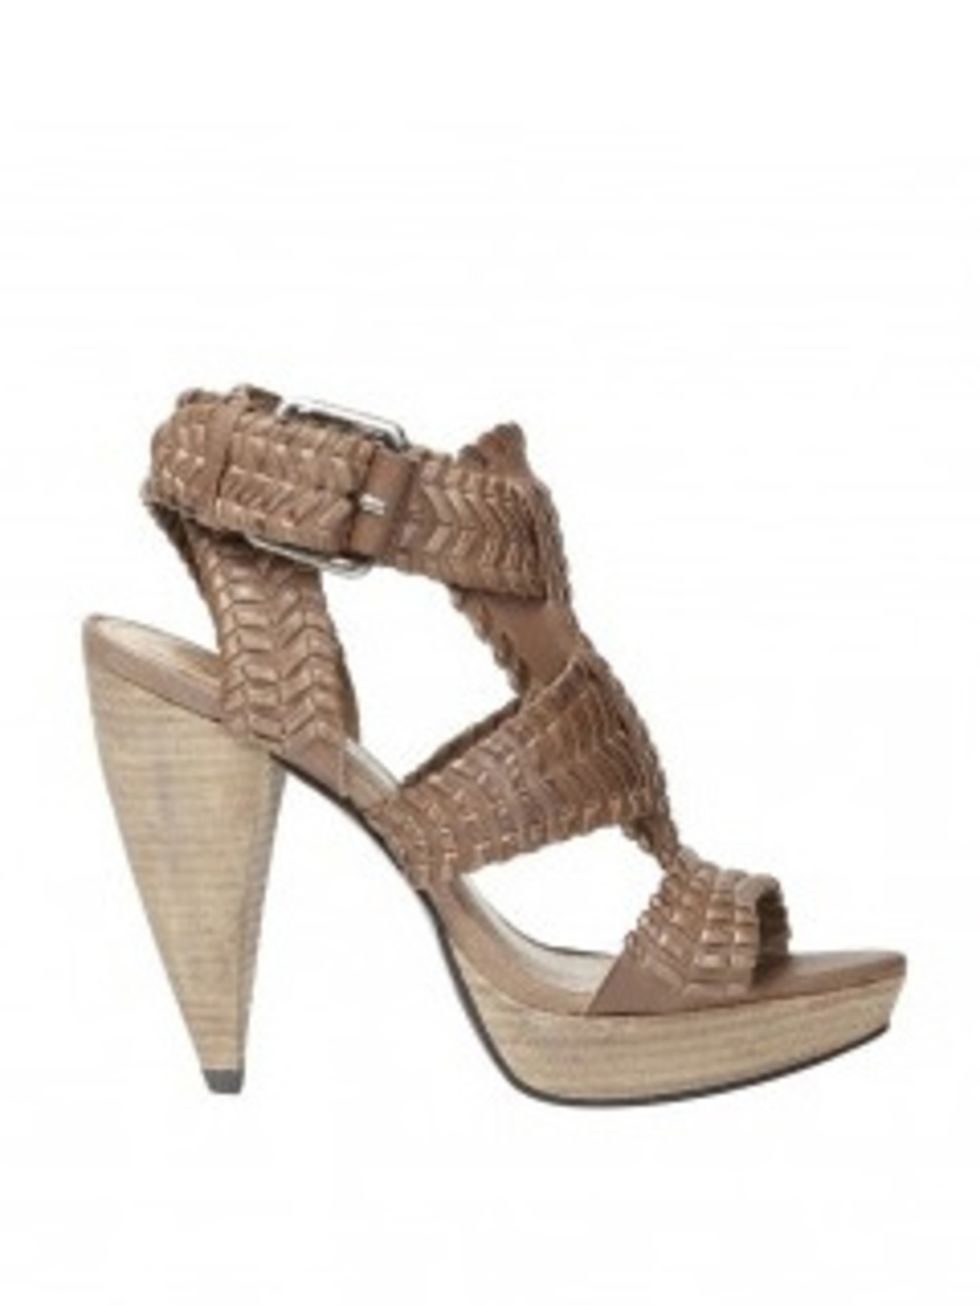 <p>With their go-with-anything woven stone leather and surprisingly chic wooden heel, these will fast become your staple summer heels. Snap them up now.</p><p>Shoes, £155 by <a href="http://www.allsaints.com/product/?all=1&amp;page=1&amp;category_id=207&a